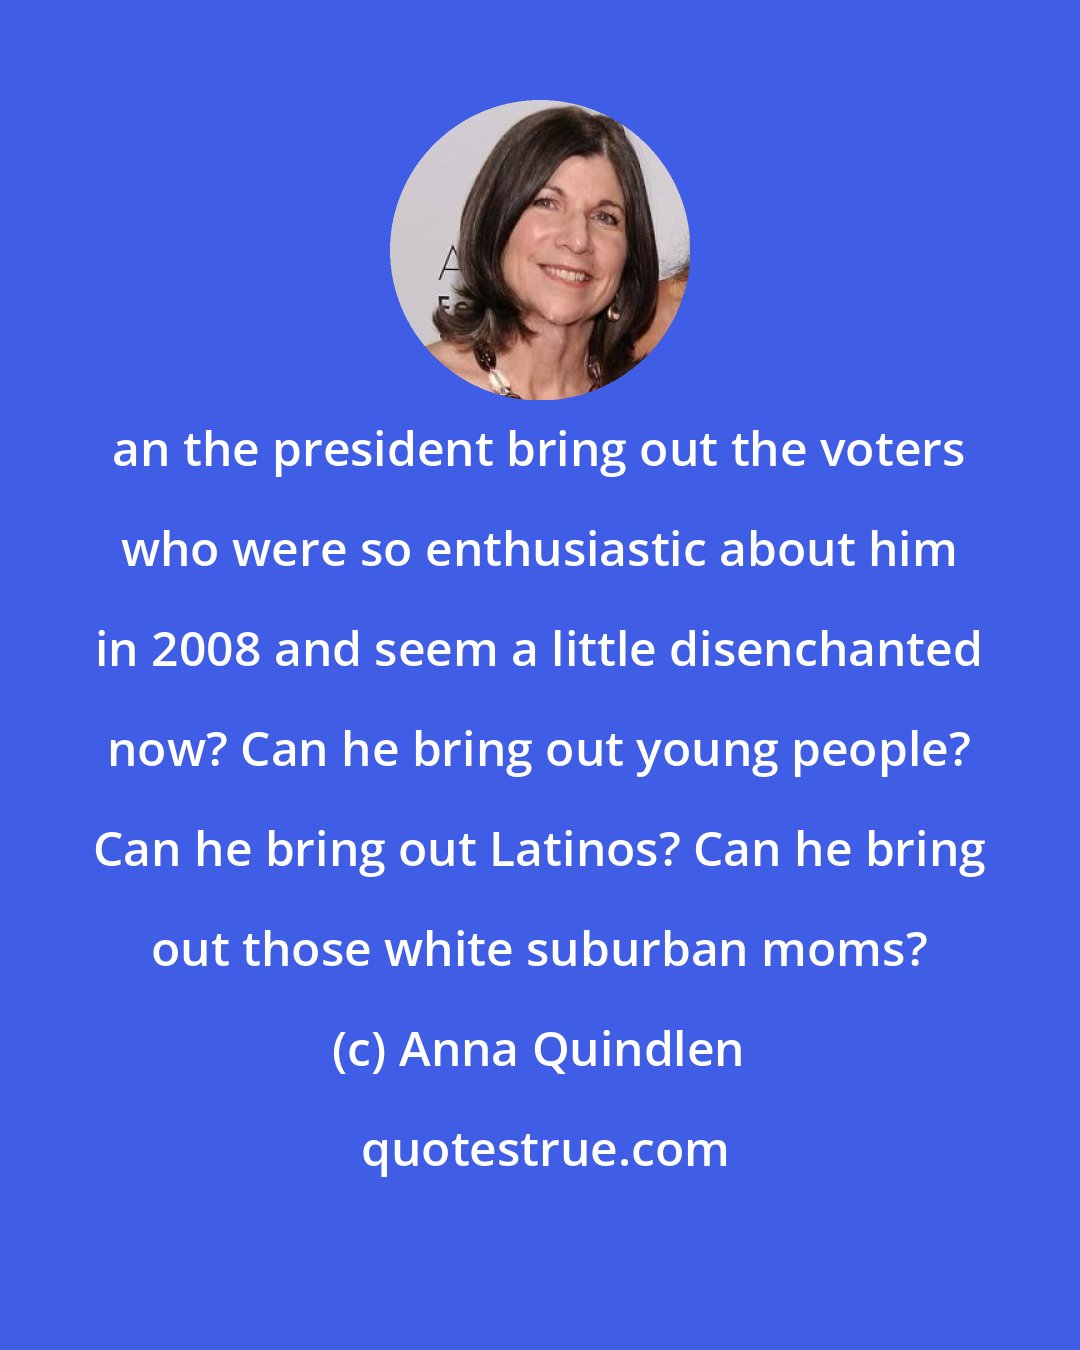 Anna Quindlen: an the president bring out the voters who were so enthusiastic about him in 2008 and seem a little disenchanted now? Can he bring out young people? Can he bring out Latinos? Can he bring out those white suburban moms?